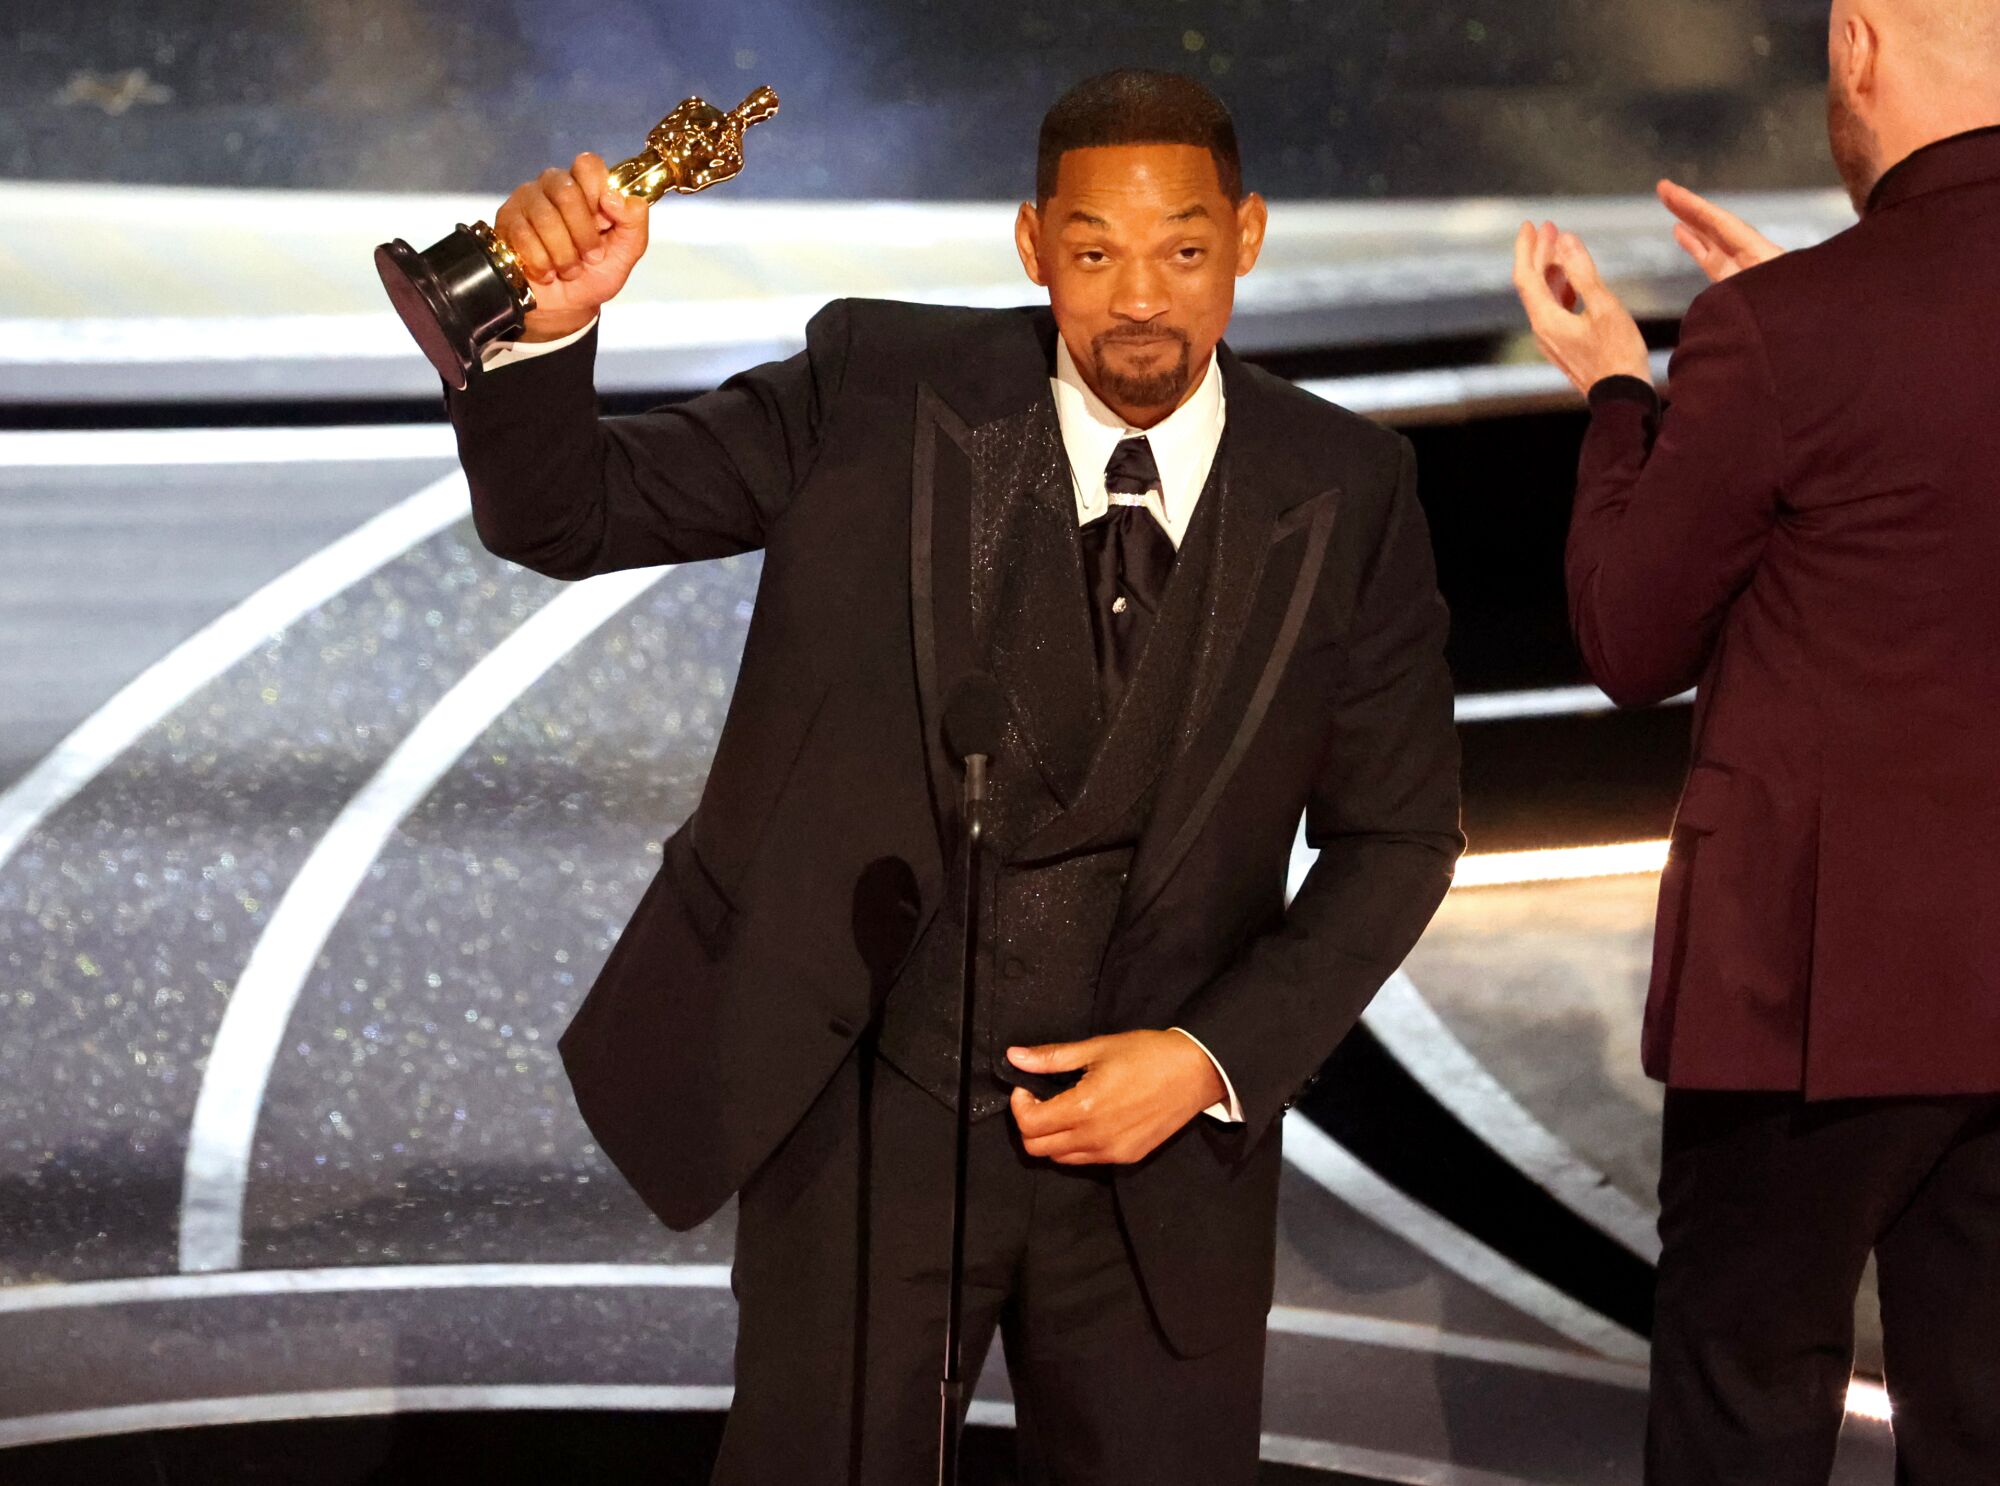 Will Smith accepts the best actor award for "King Richard" during the 94th Academy Awards.